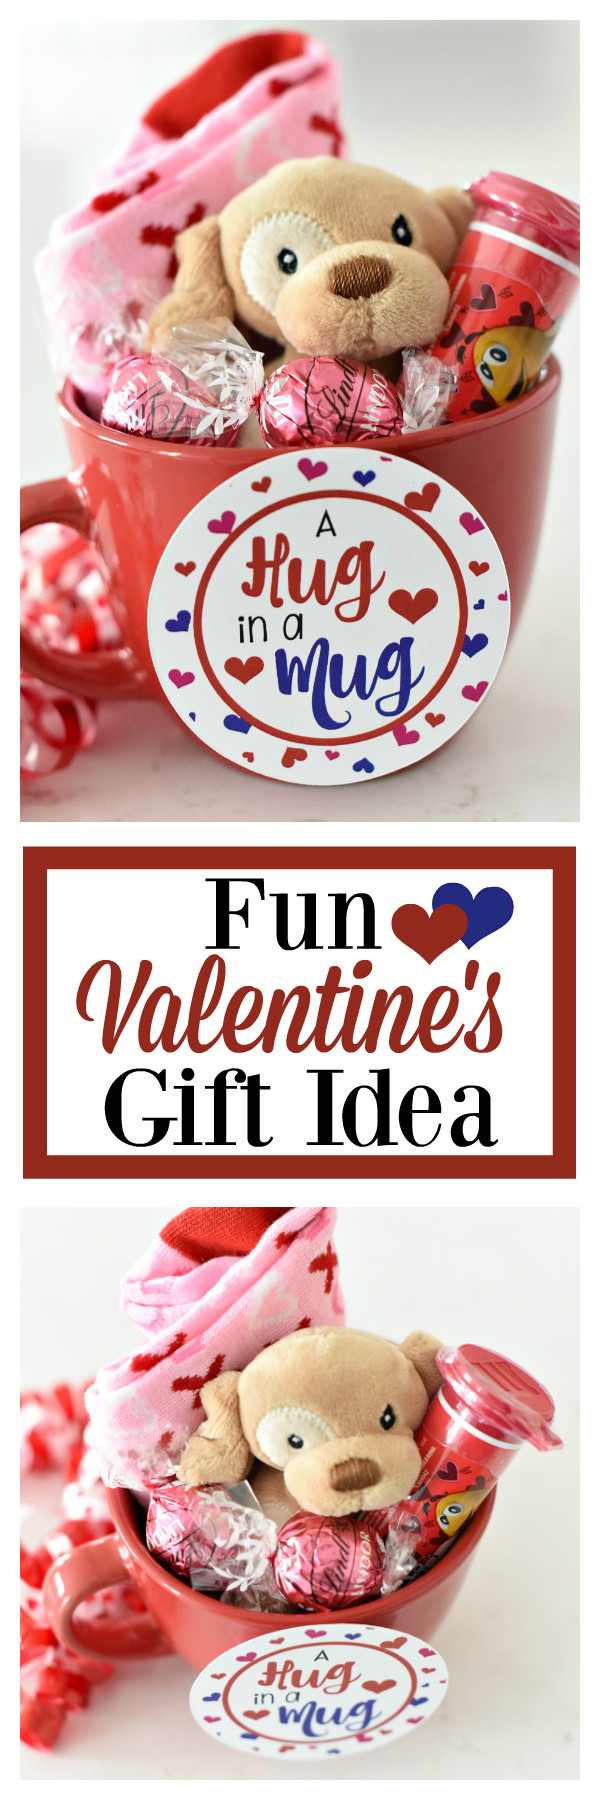 Valentines Gift Ideas For College Students
 Fun Valentines Gift Idea for Kids – Fun Squared